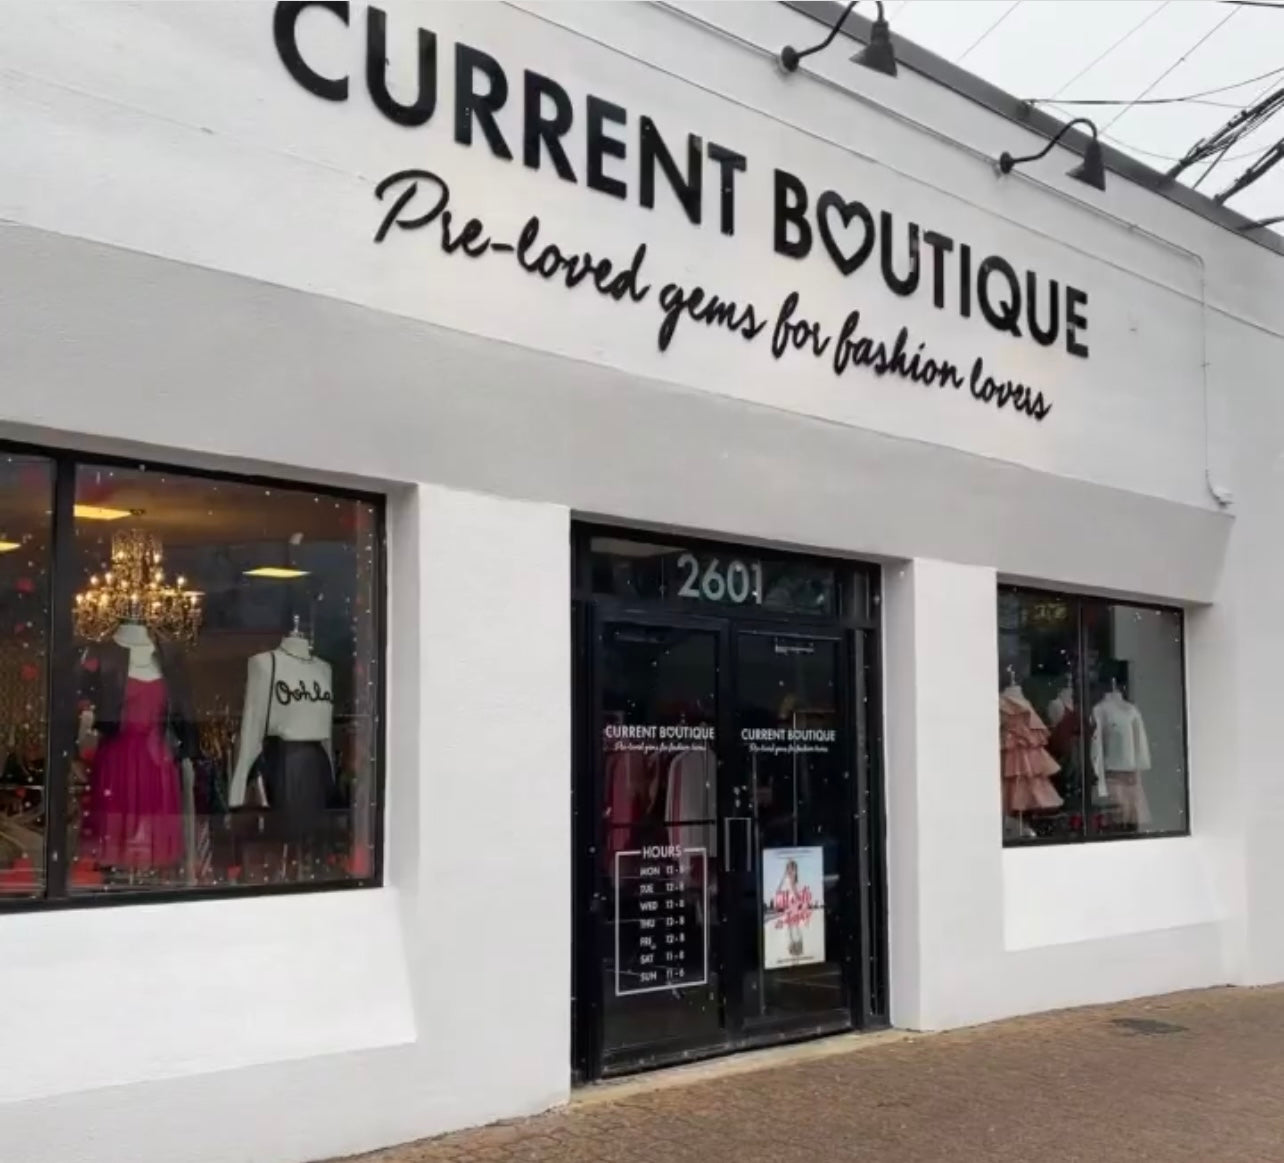 Consignment boutique specializes in high-end women's clothing